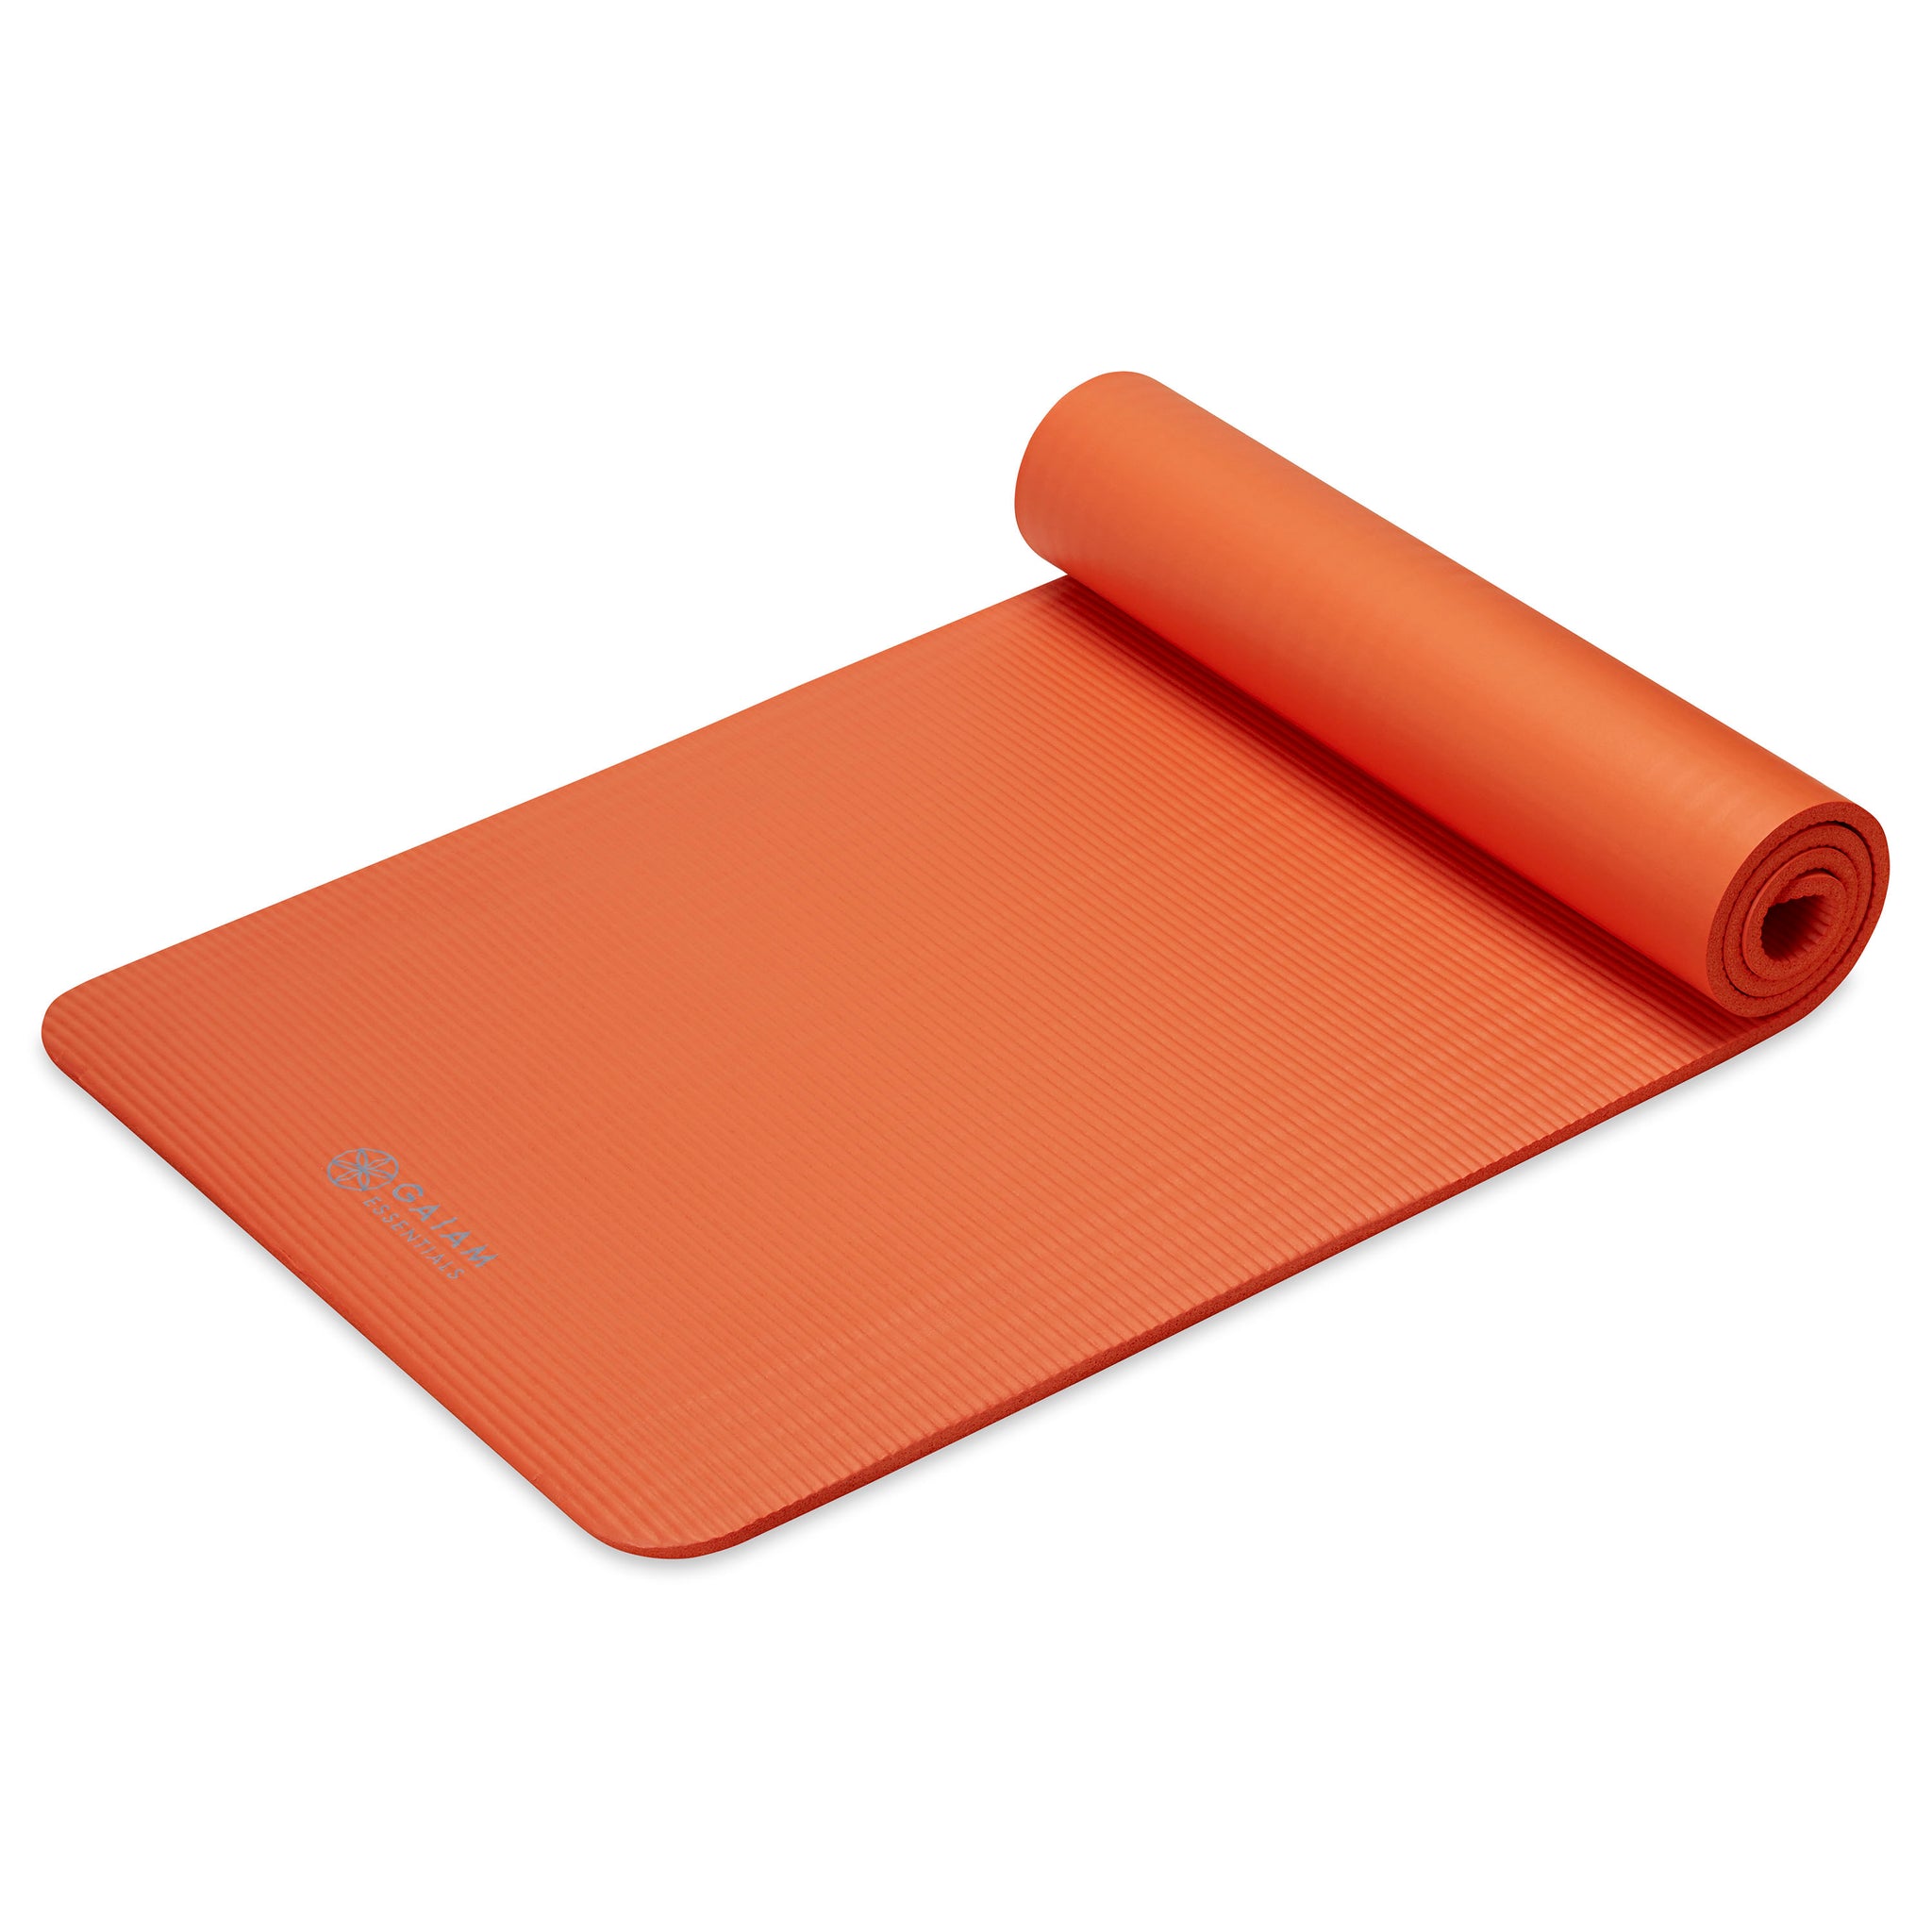 🔥 Elevate your workouts with our Product of the Week! Unleash the power of HOTWORX  Yoga Mat & Towel - 10% OFF! Enhance isometric work